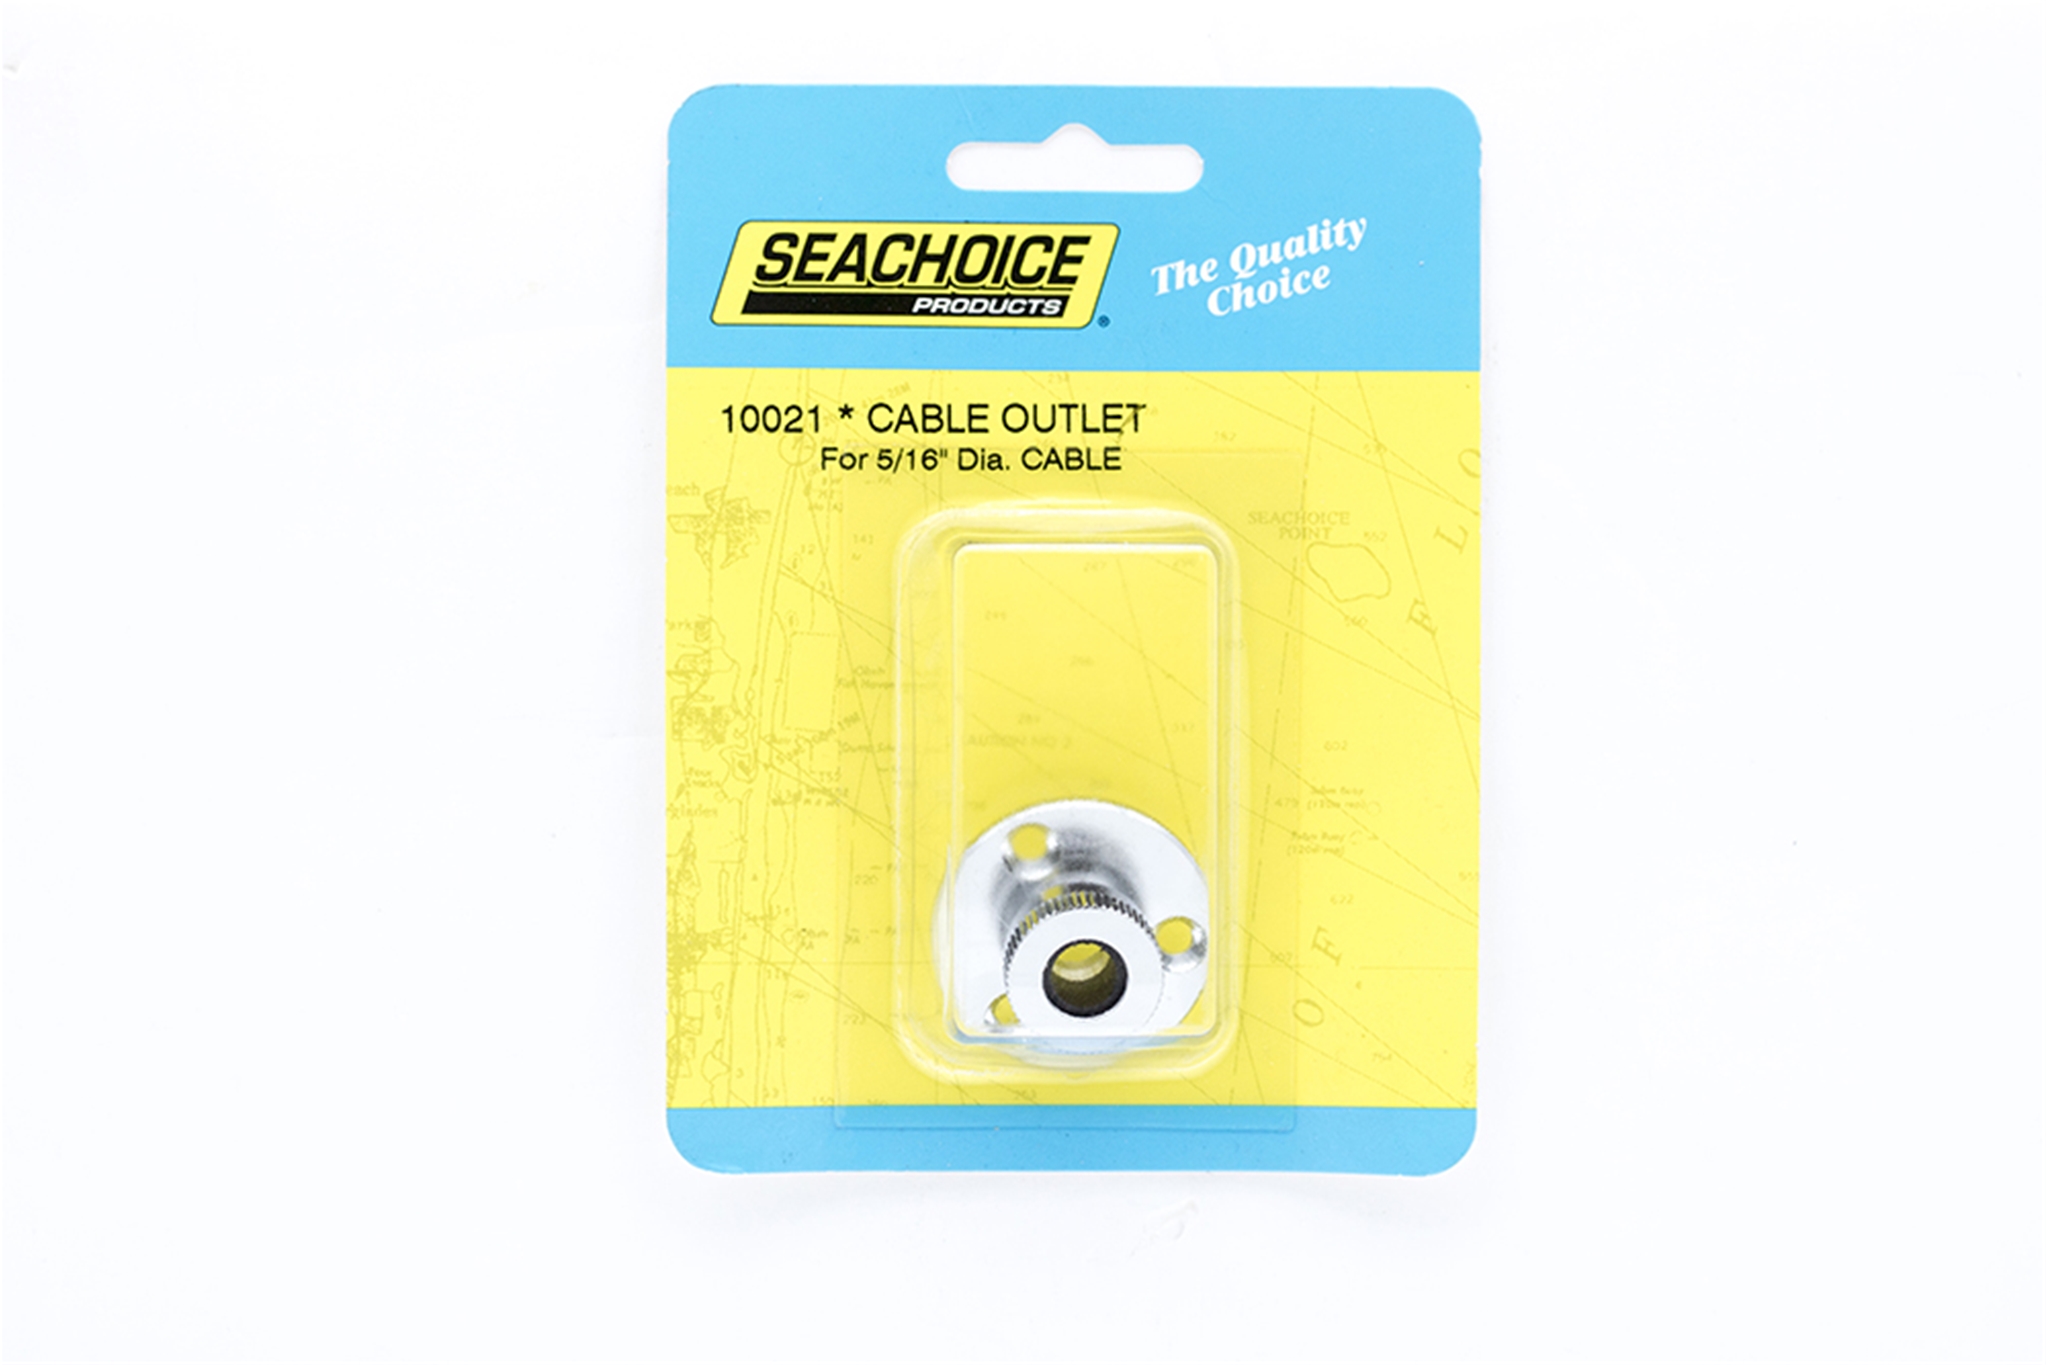 Seachoice 50-10021 VHF Cable Outlet Watertight CPB 